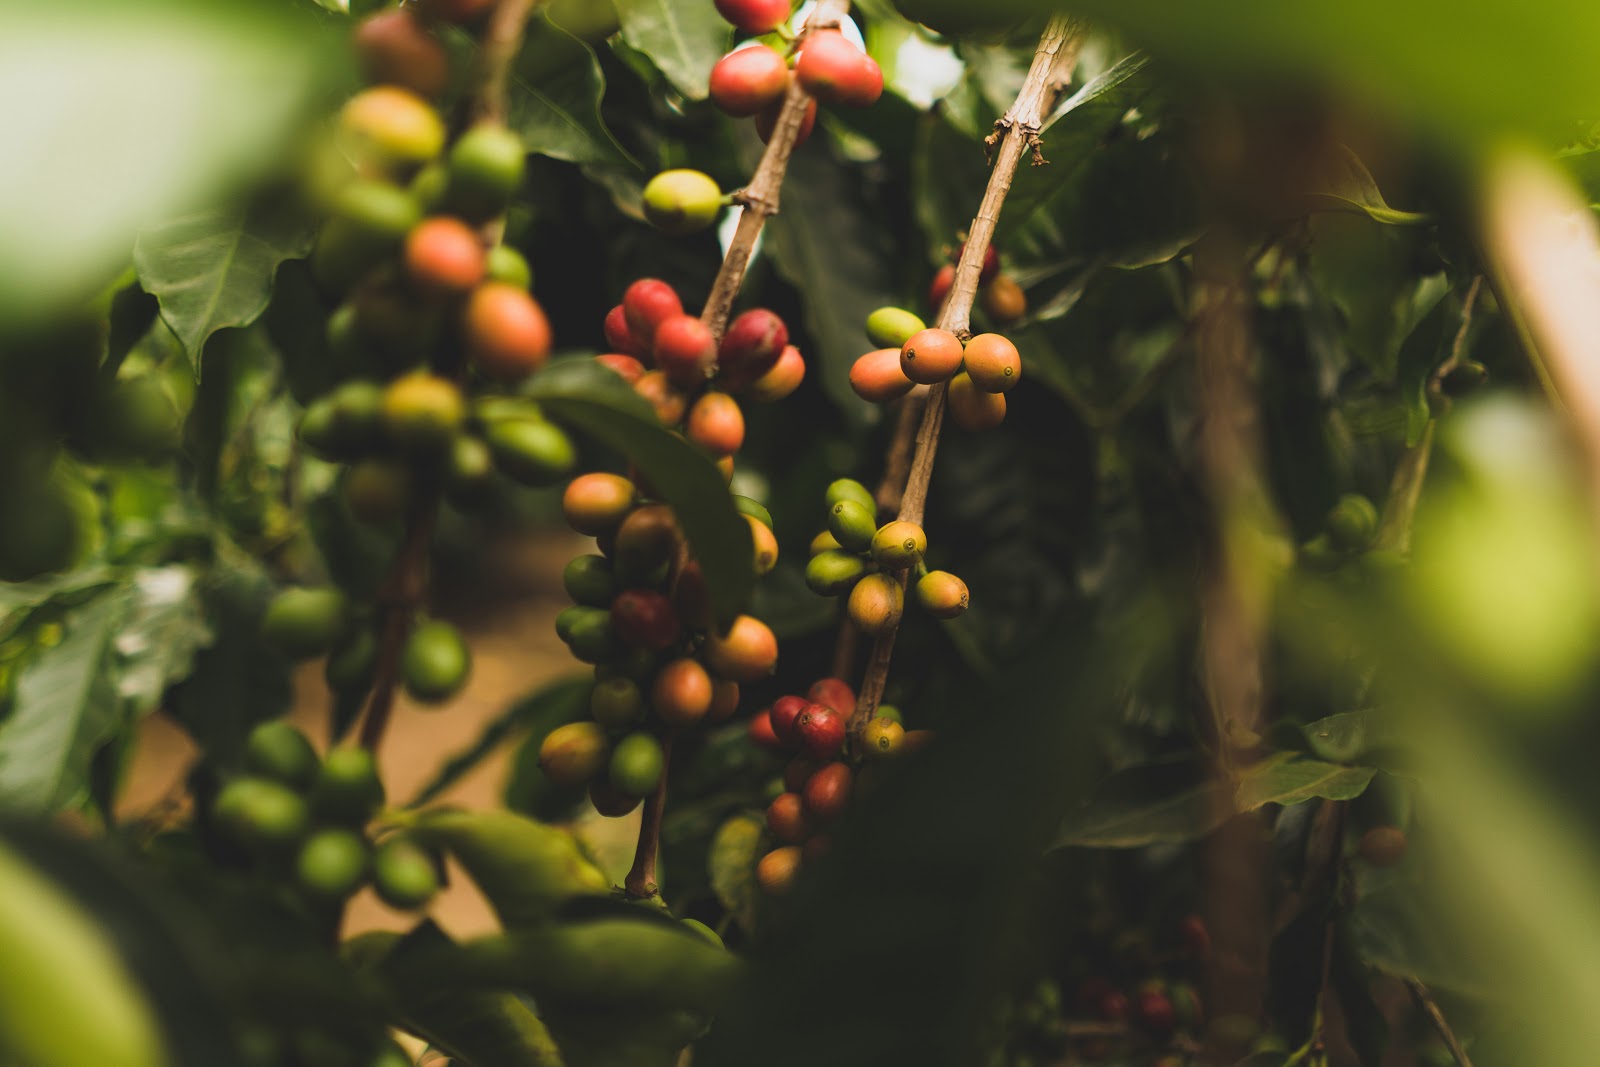 coffee cherries of different colours growing on a coffee plant